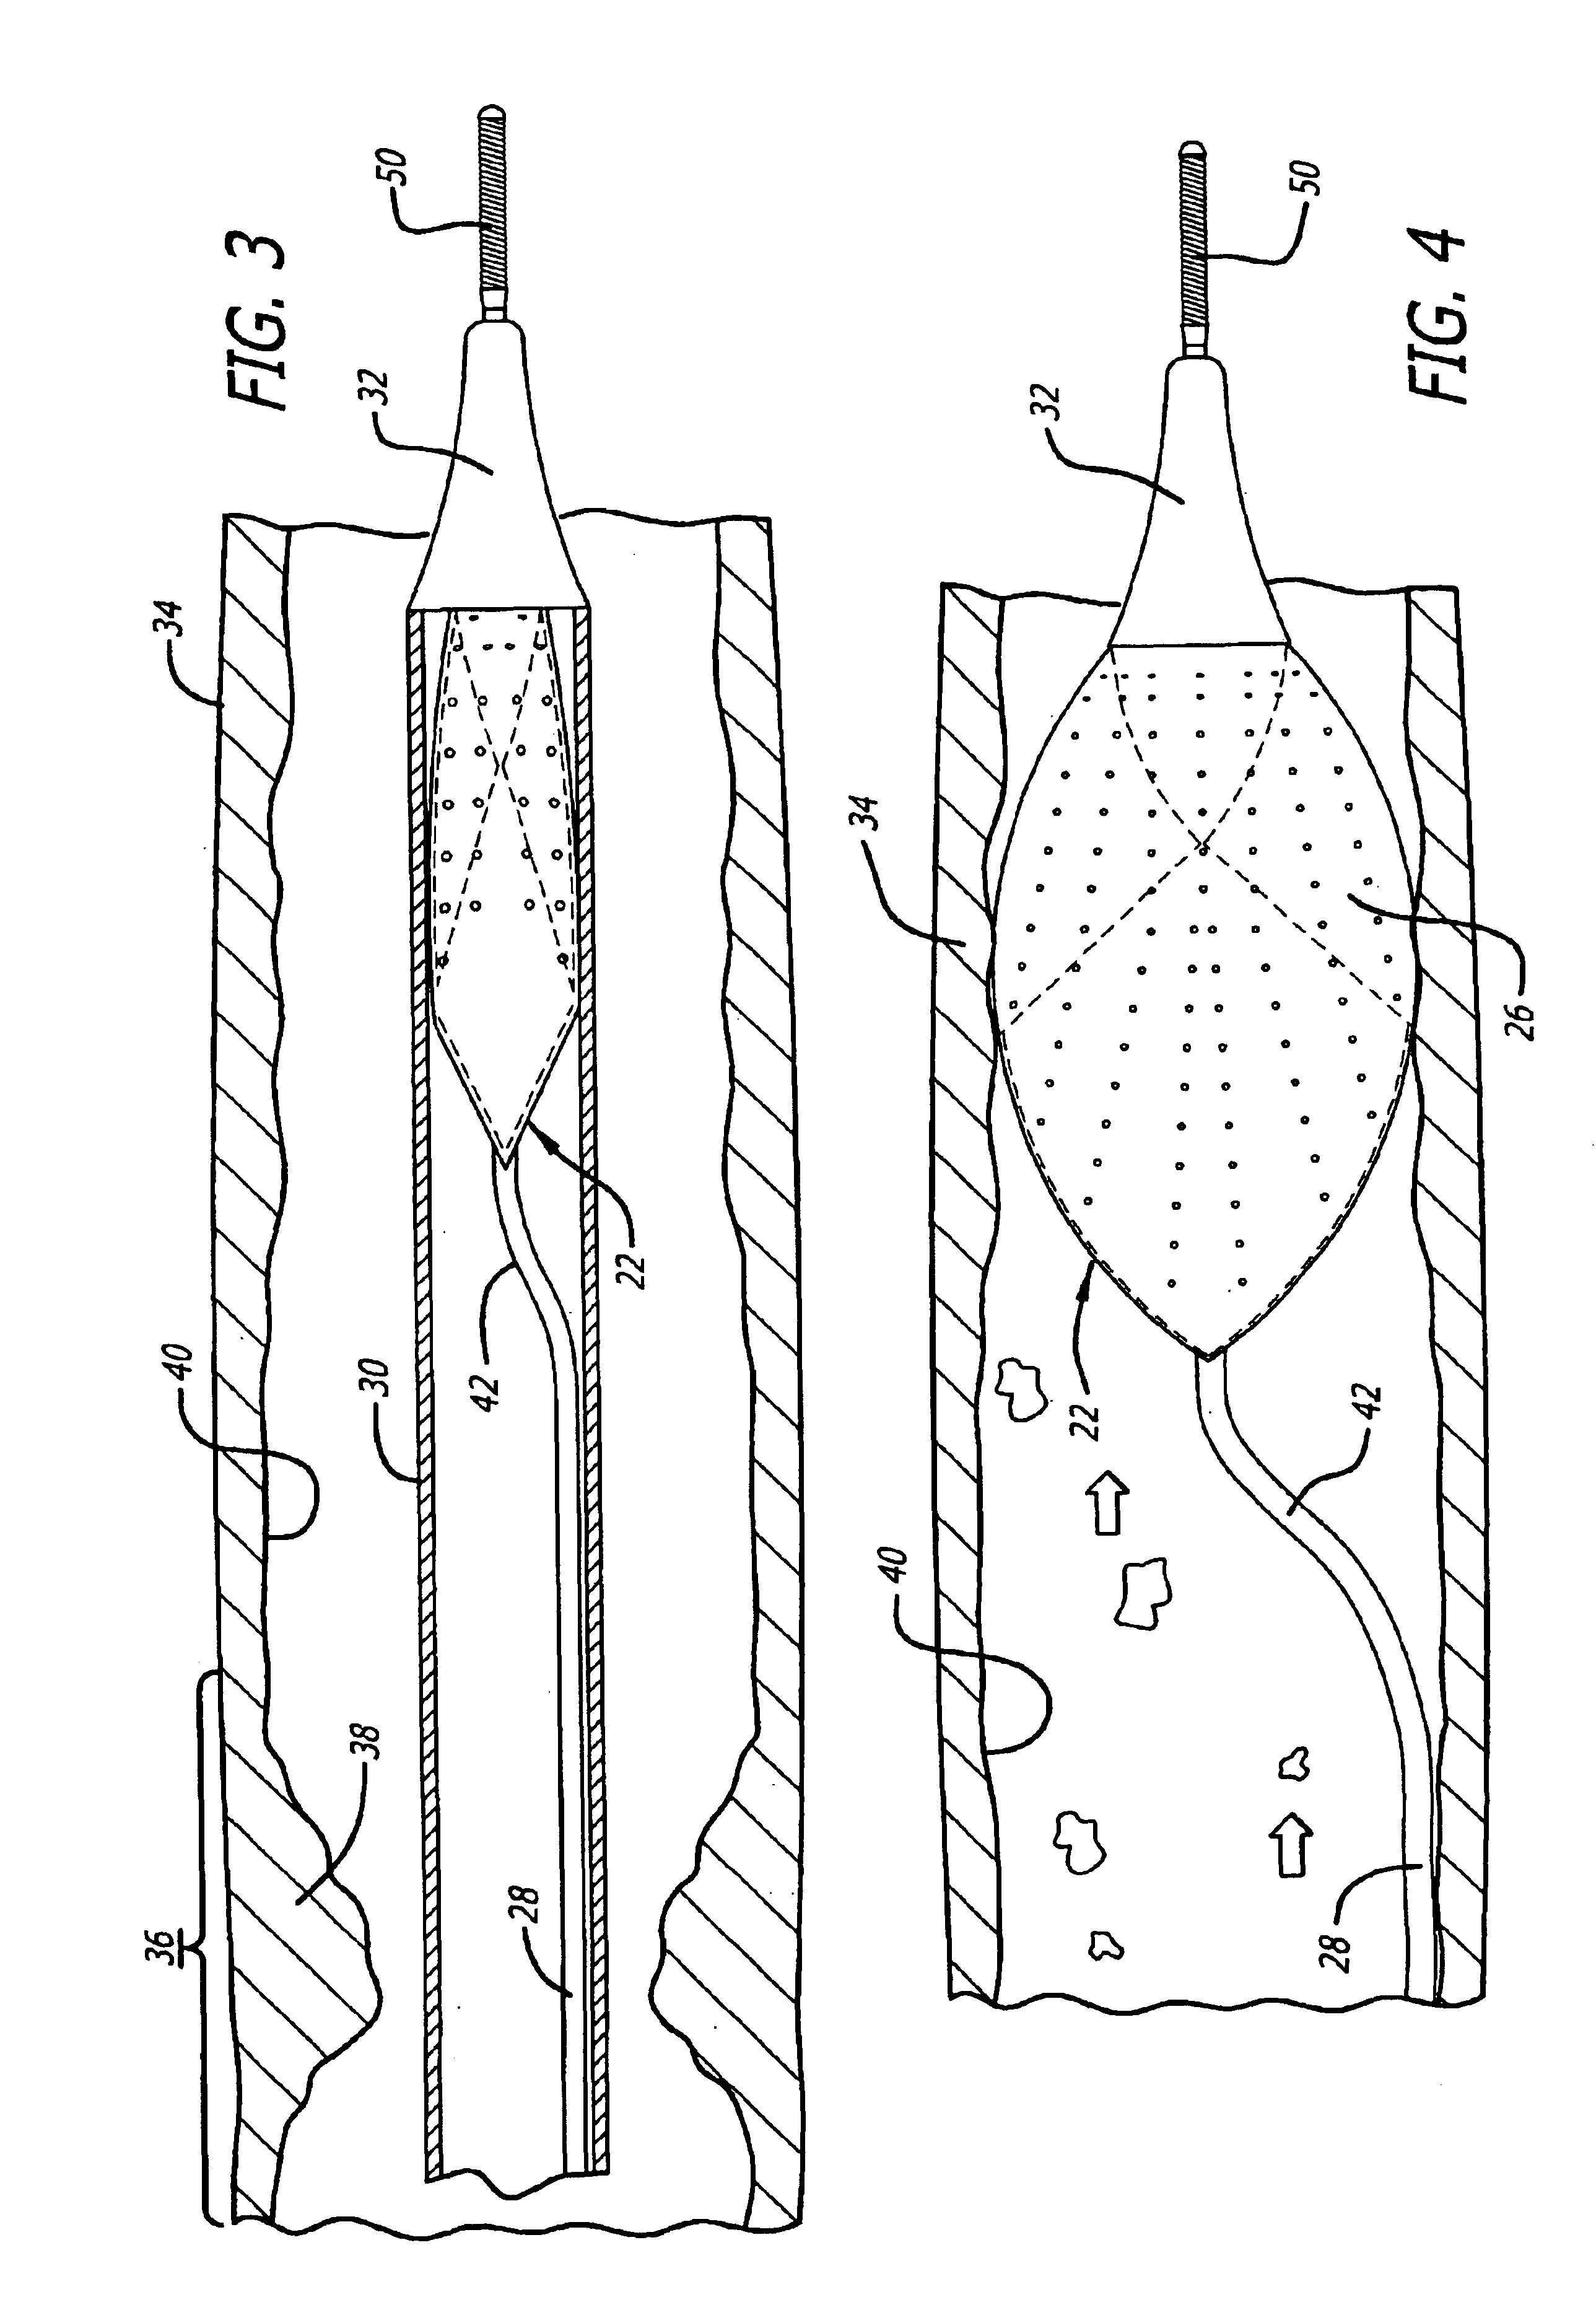 Offset proximal cage for embolic filtering devices